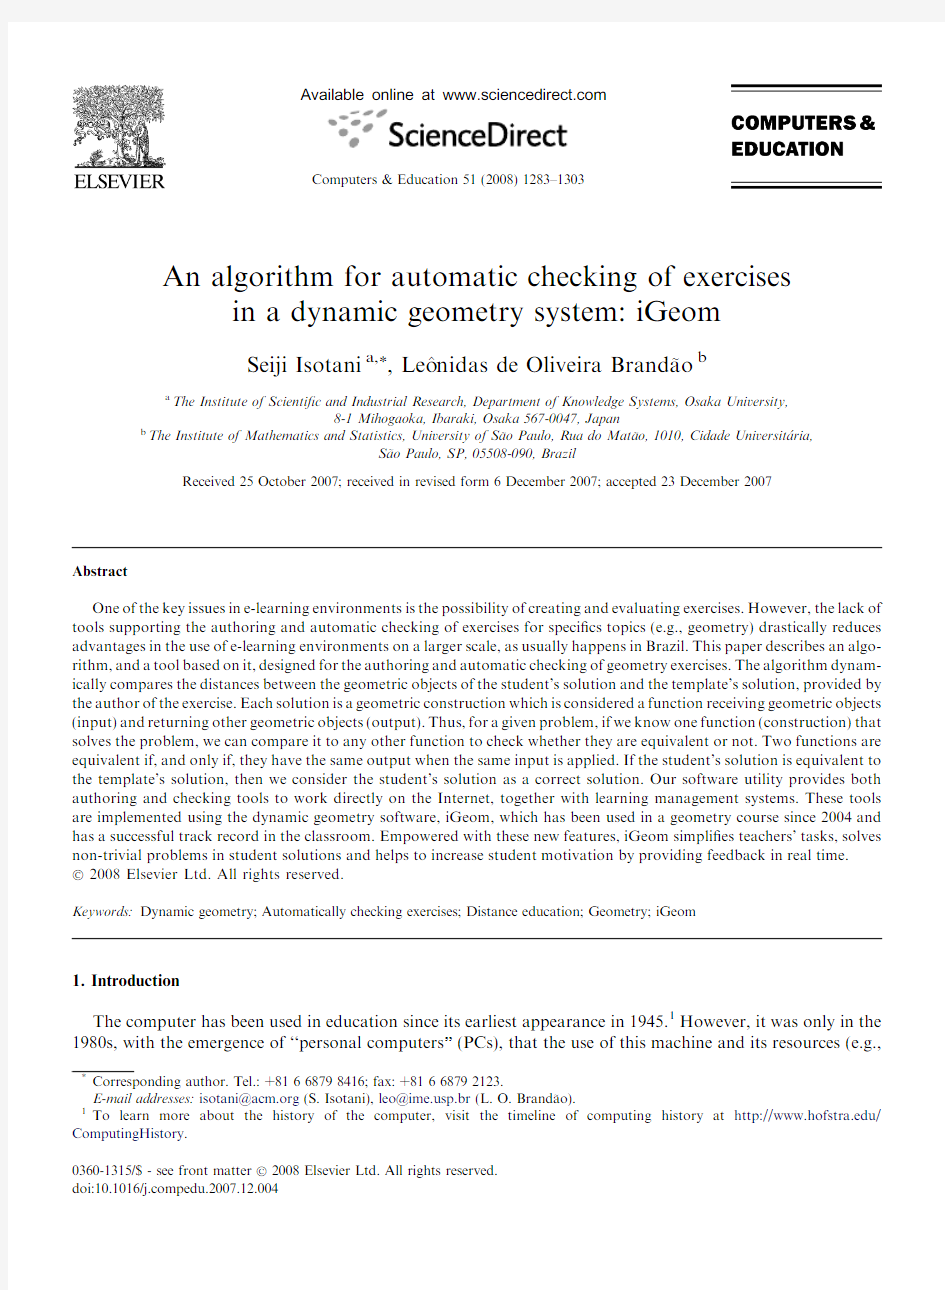 An algorithm for automatic checking of exercises in a dynamic geometry system-iGeom